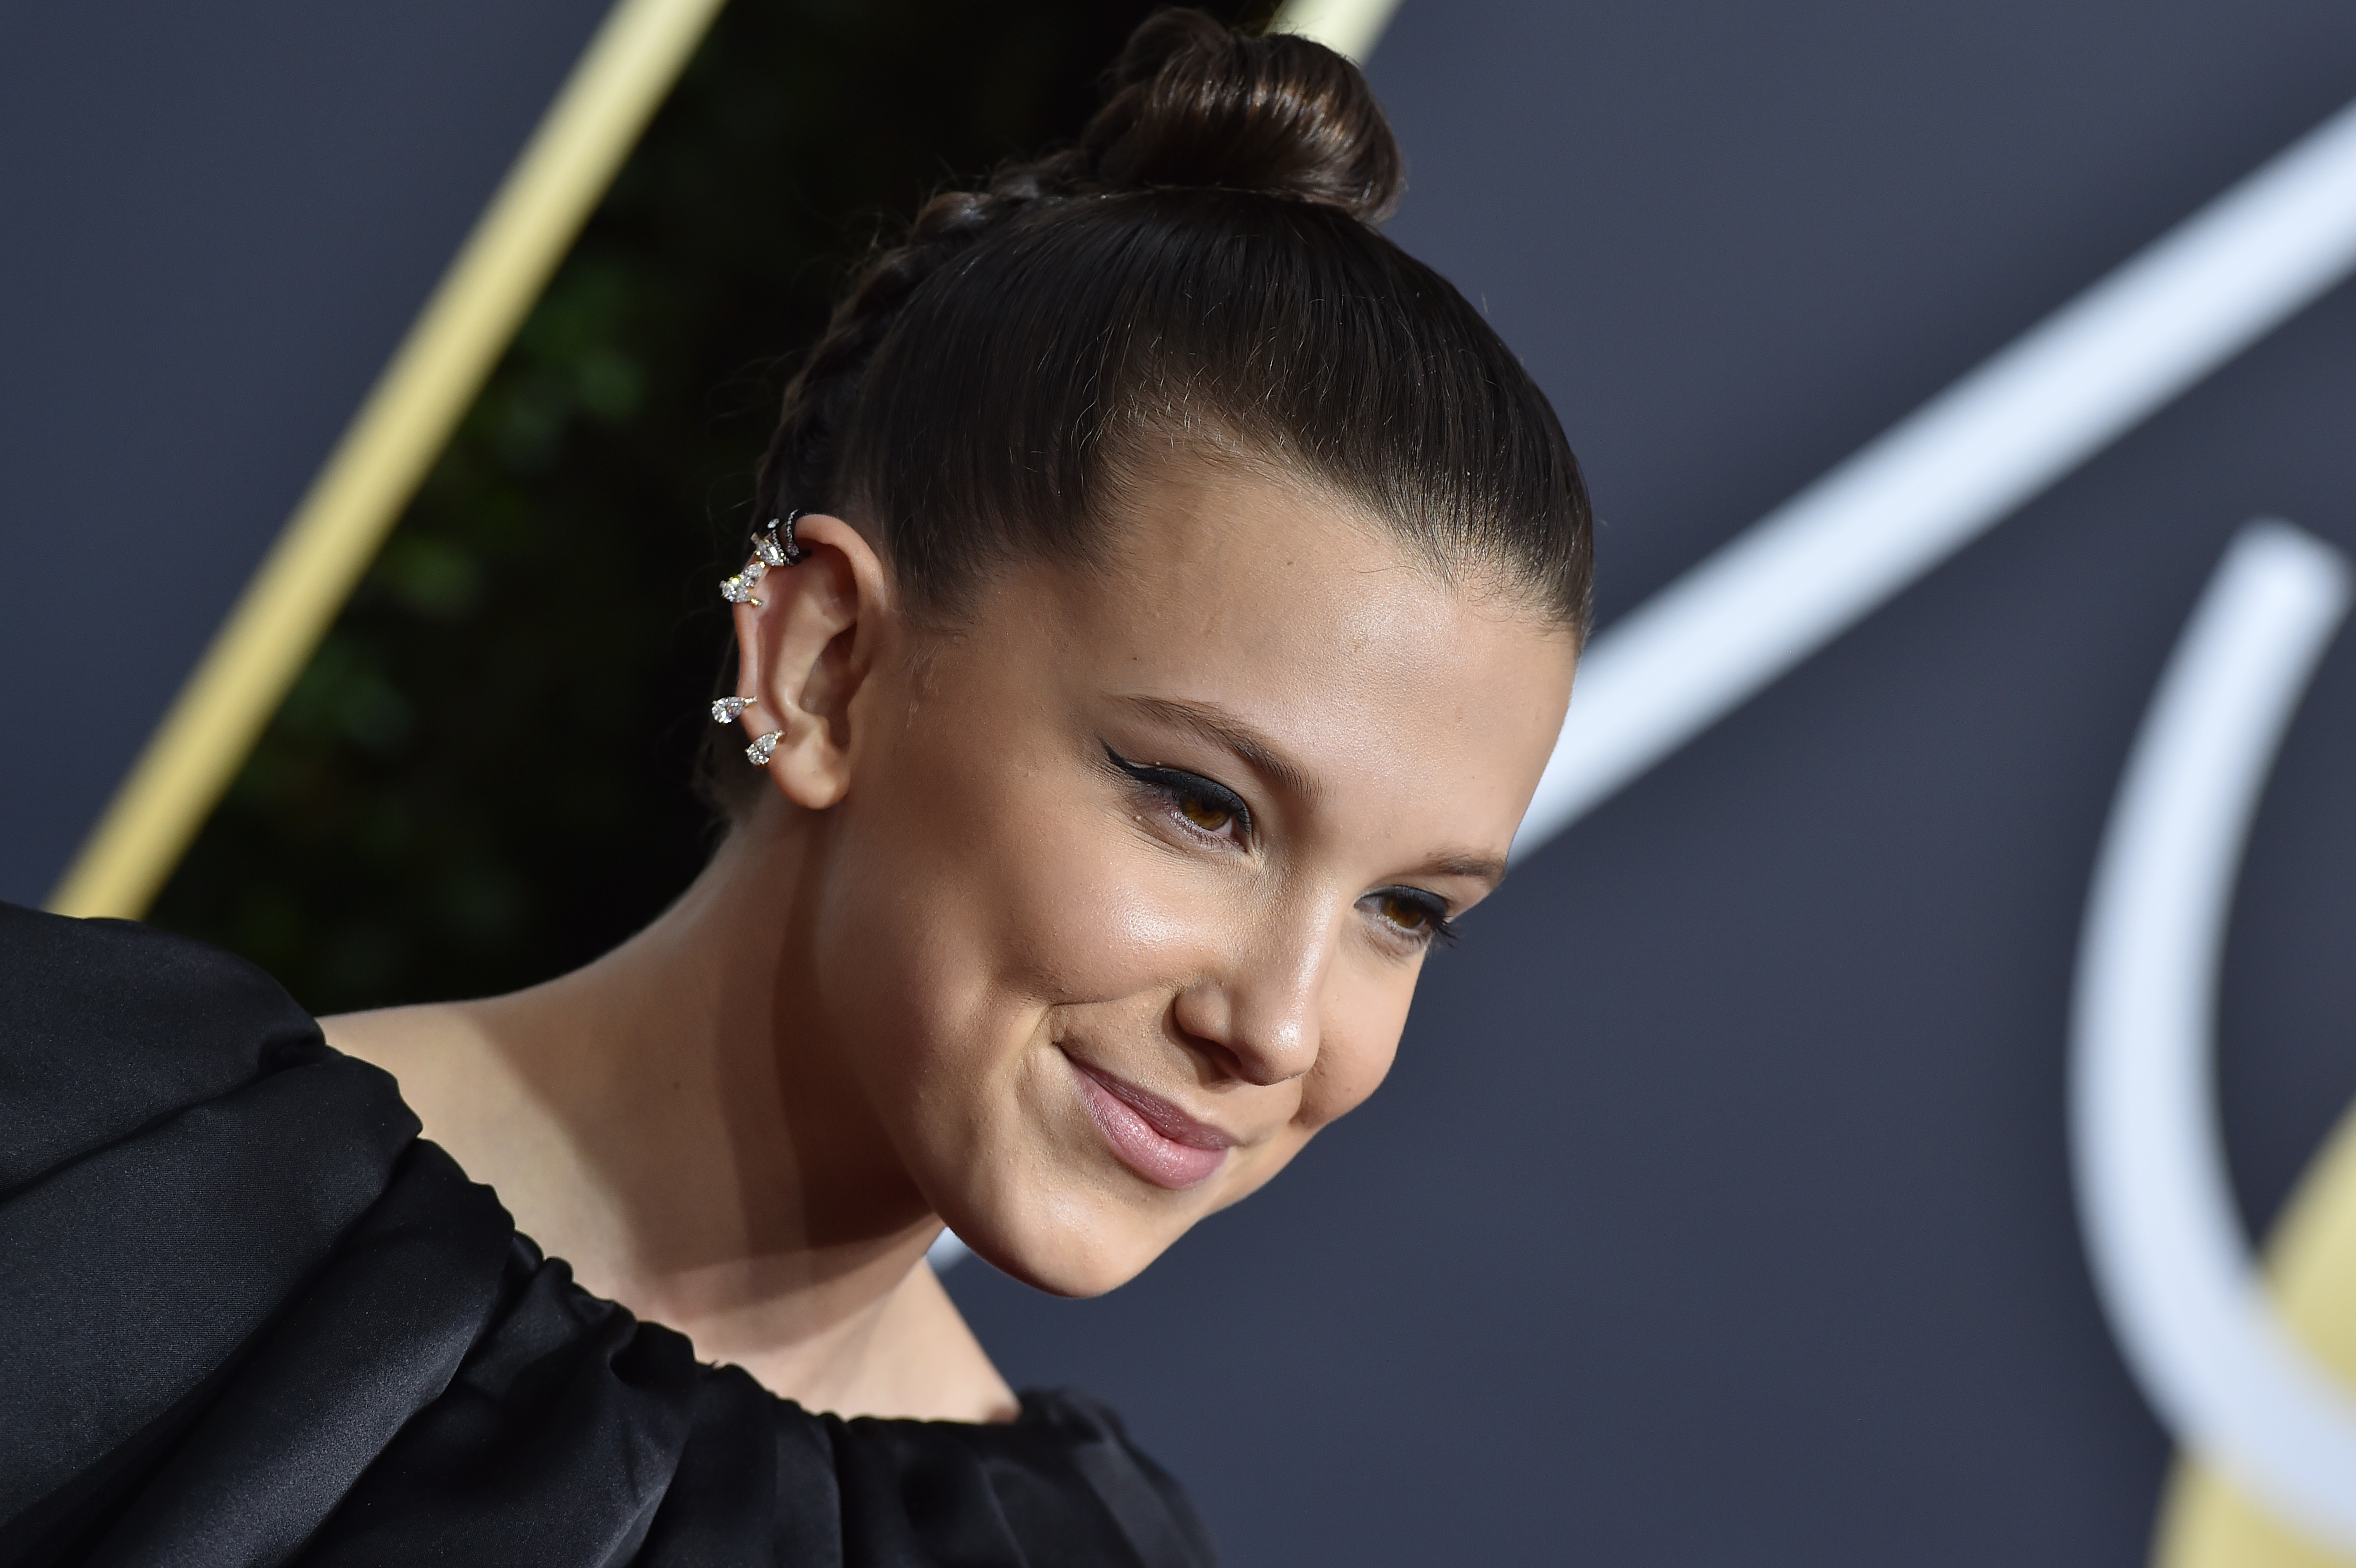 BEVERLY HILLS, CA - JANUARY 07:  Actress Millie Bobby Brown attends the 75th Annual Golden Globe Awards at The Beverly Hilton Hotel on January 7, 2018 in Beverly Hills, California.  (Photo by Axelle/Bauer-Griffin/FilmMagic) (Axelle/Bauer-Griffin&mdash;FilmMagic)